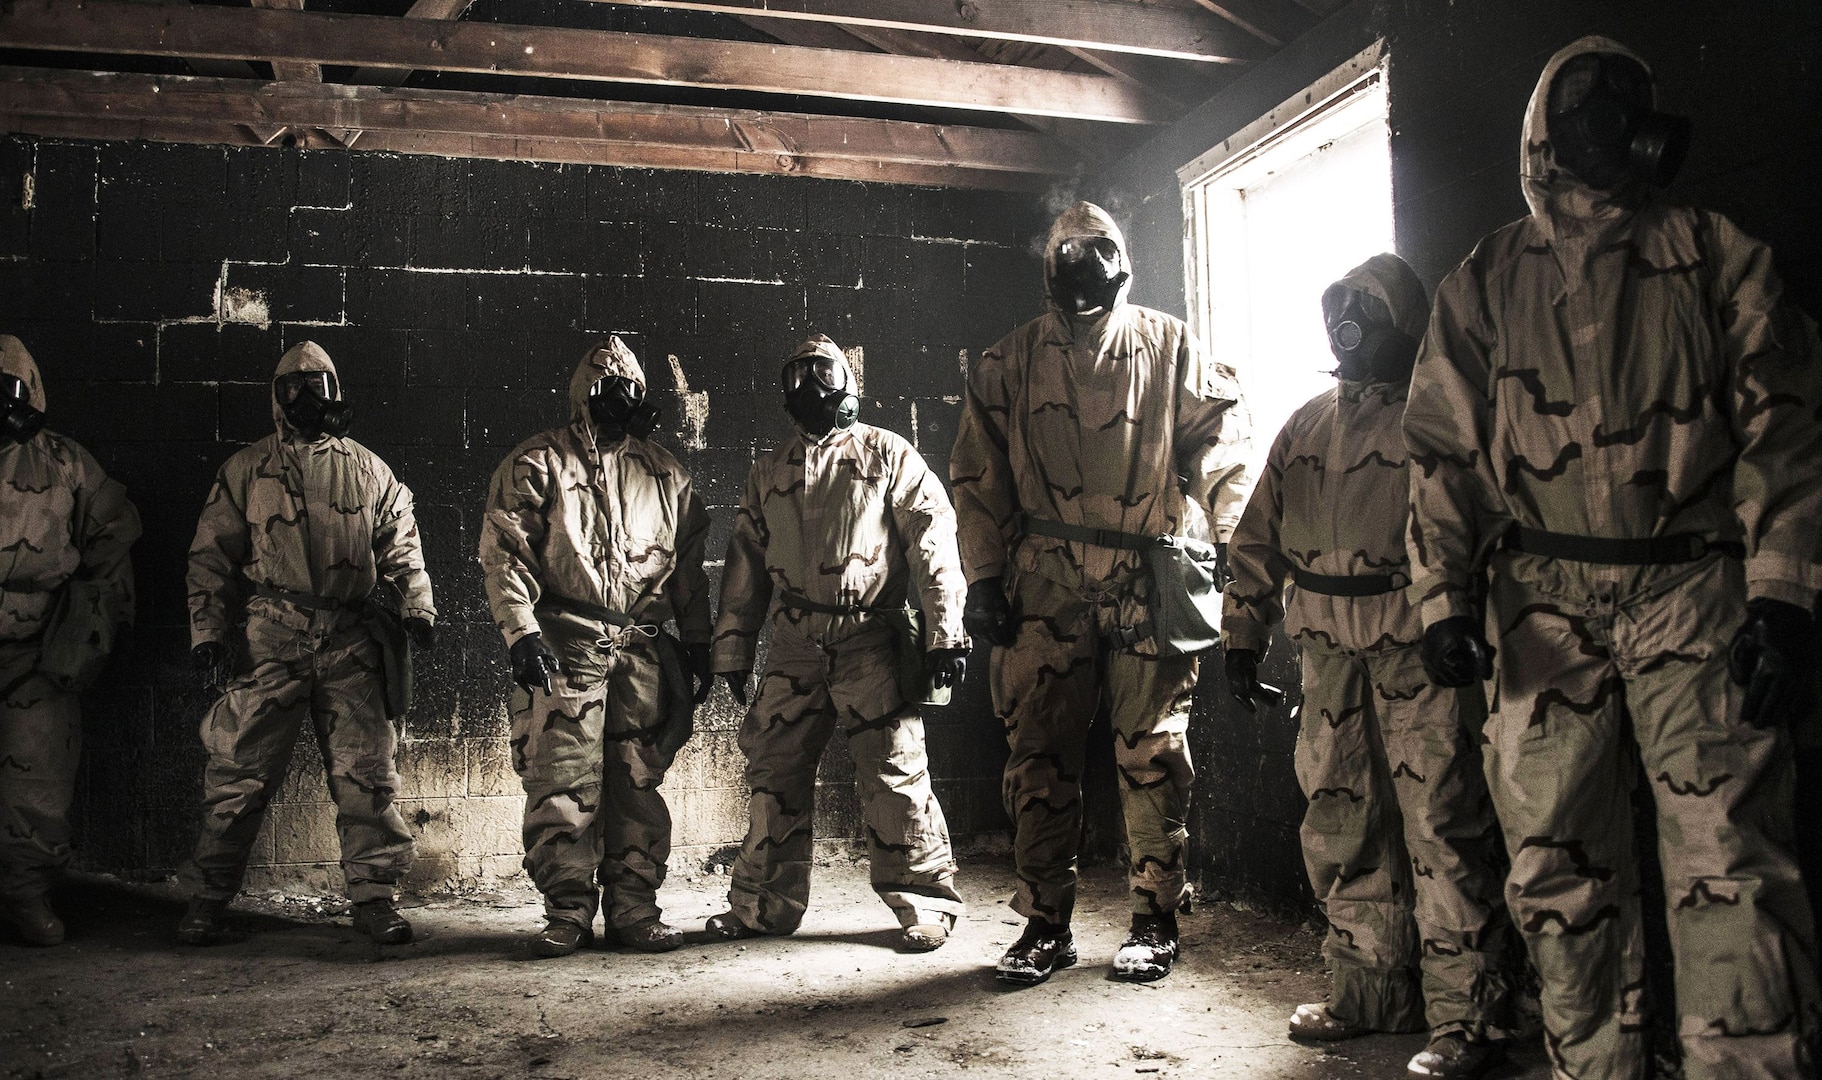 Members of DLA’s rapid deployment Red Team brave the gas chamber to conduct a functions test on personal protective equipment during nuclear, biological and chemical training at Camp Atterbury, Indiana, Jan. 16-20.